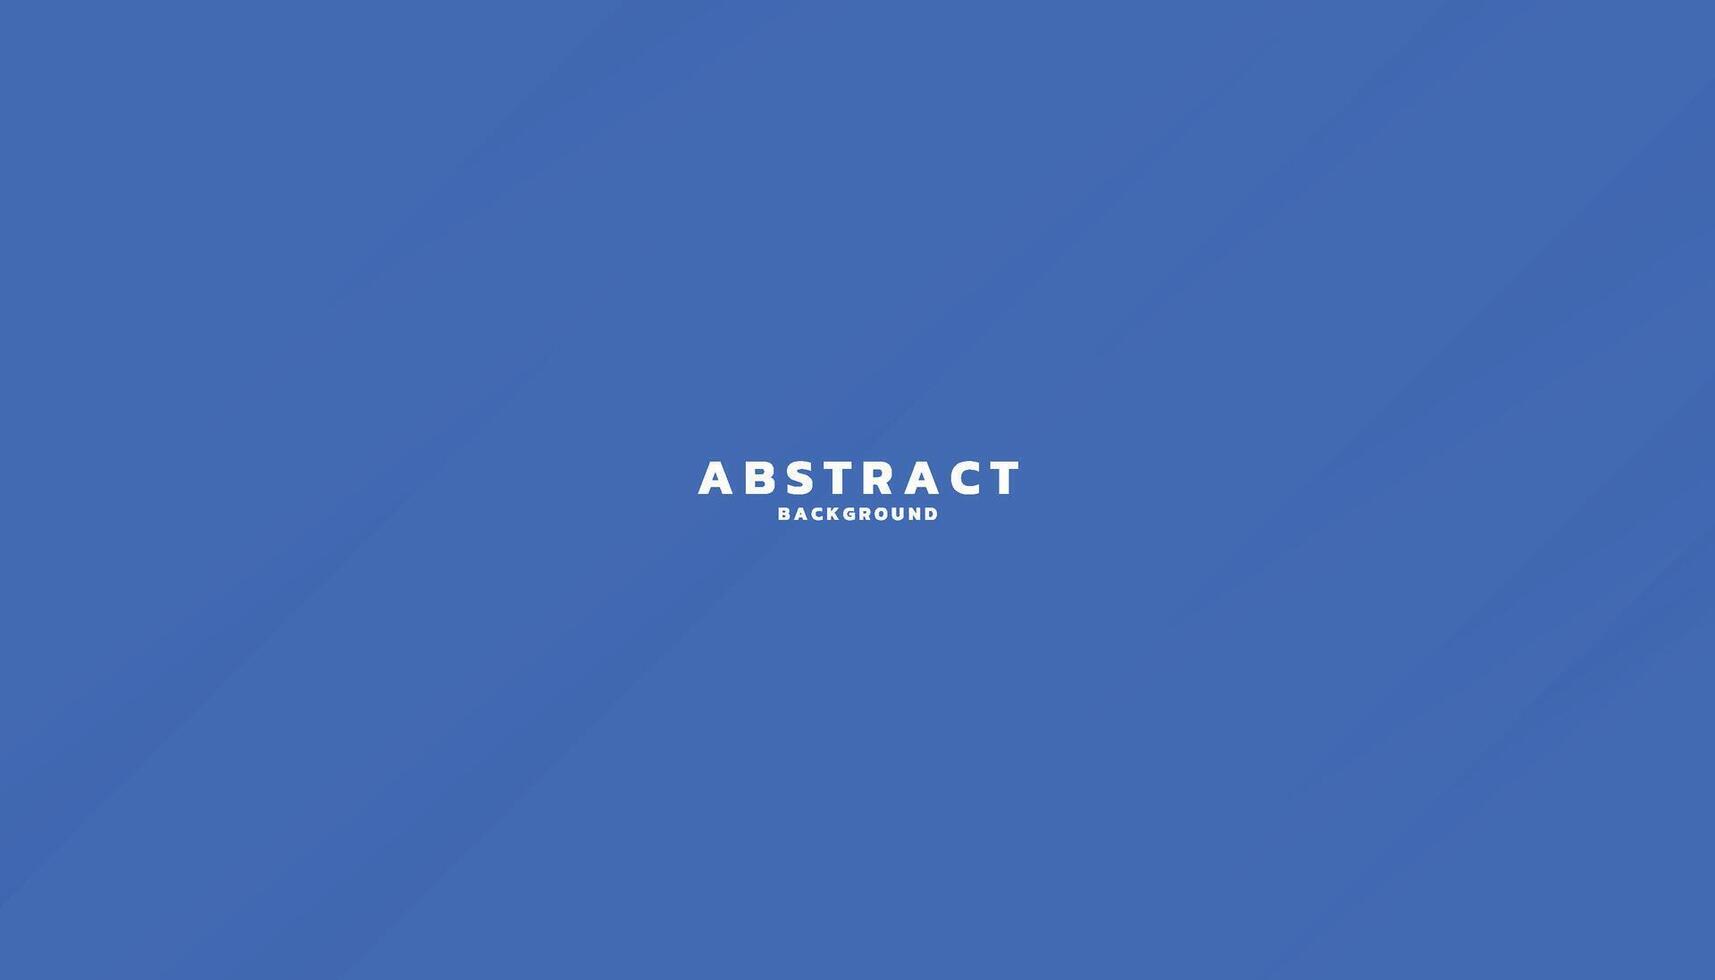 Abstract blue vector background with diagonal stripes.